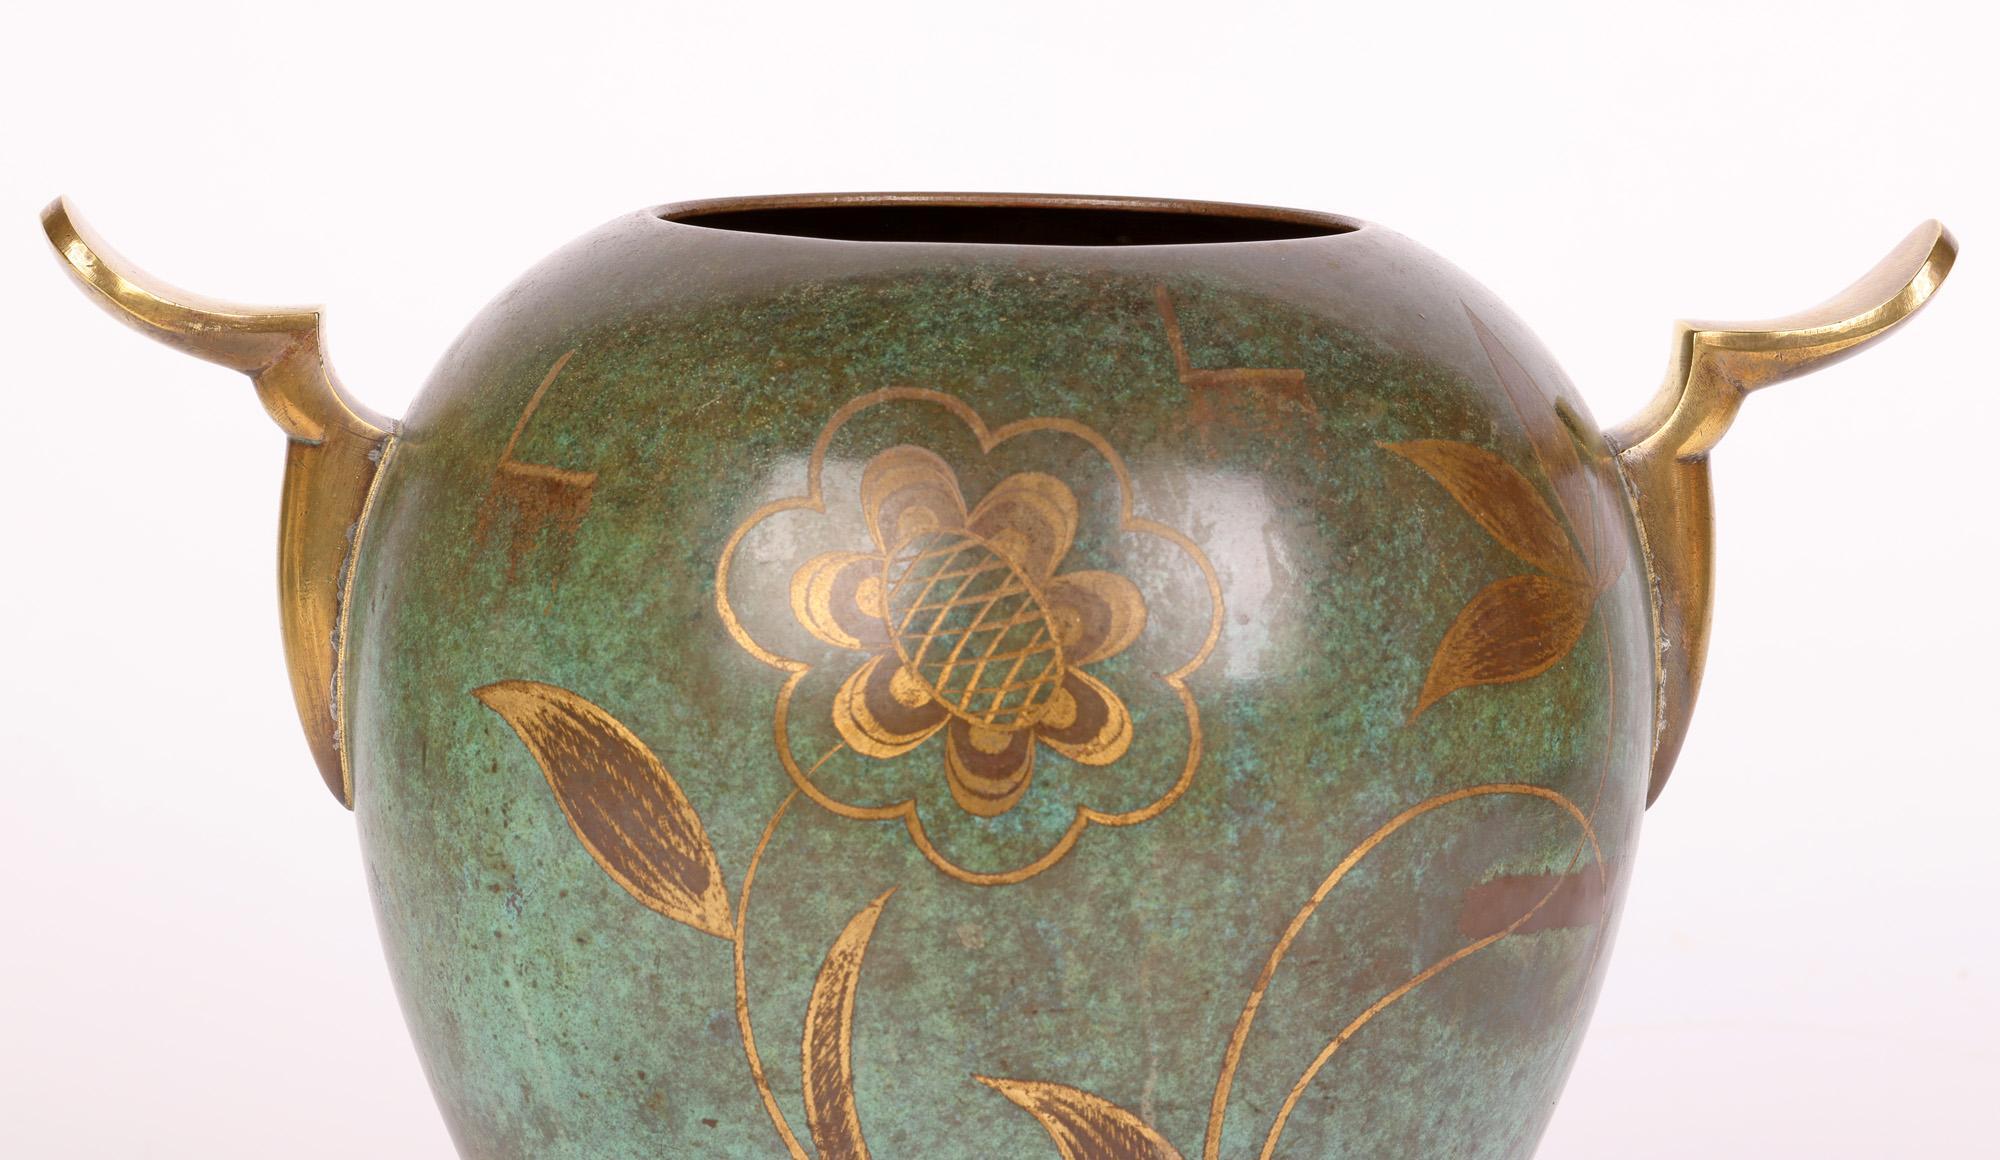 A very fine and stylish Art Deco WMF (Württembergische Metallwarenfabrik) patinated bronze twin handled Ikora vase decorated with stylized floral designs by Paul Haustein (1880-1944) and dating from around 1920. This elegantly shaped vase stands on